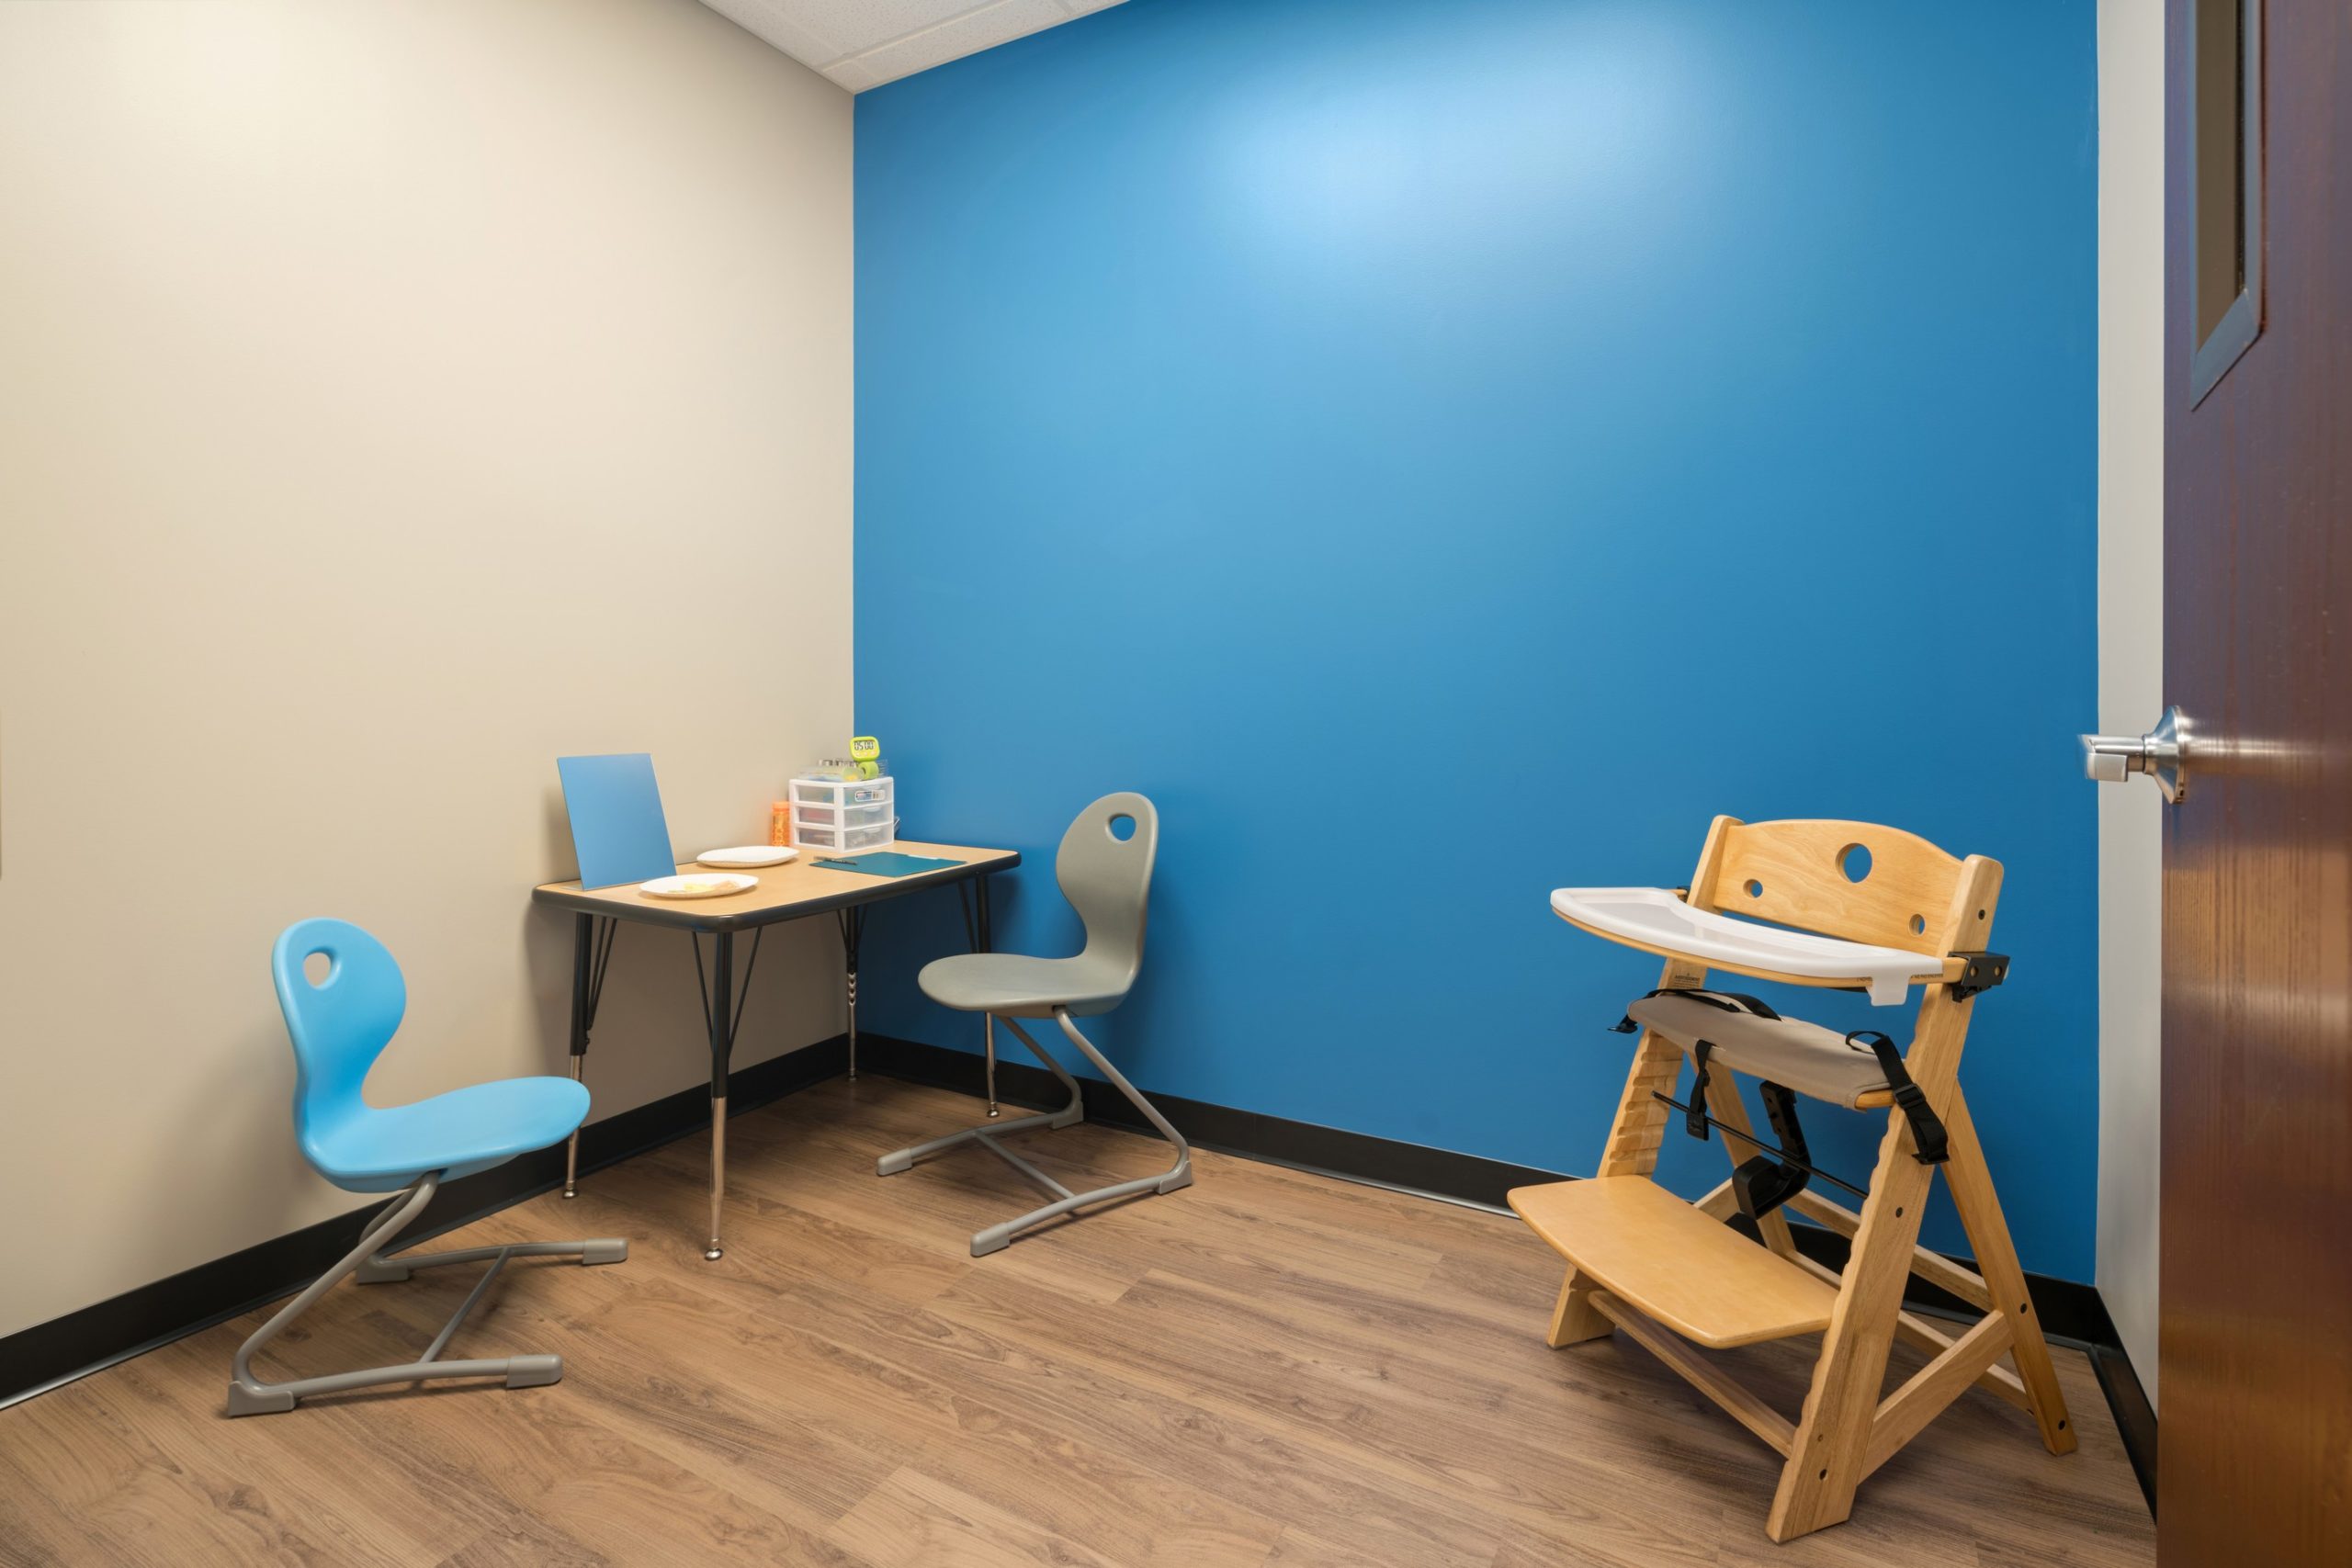 Private activity room in Westside Children's Therapy New Lenox clinic in Illinois